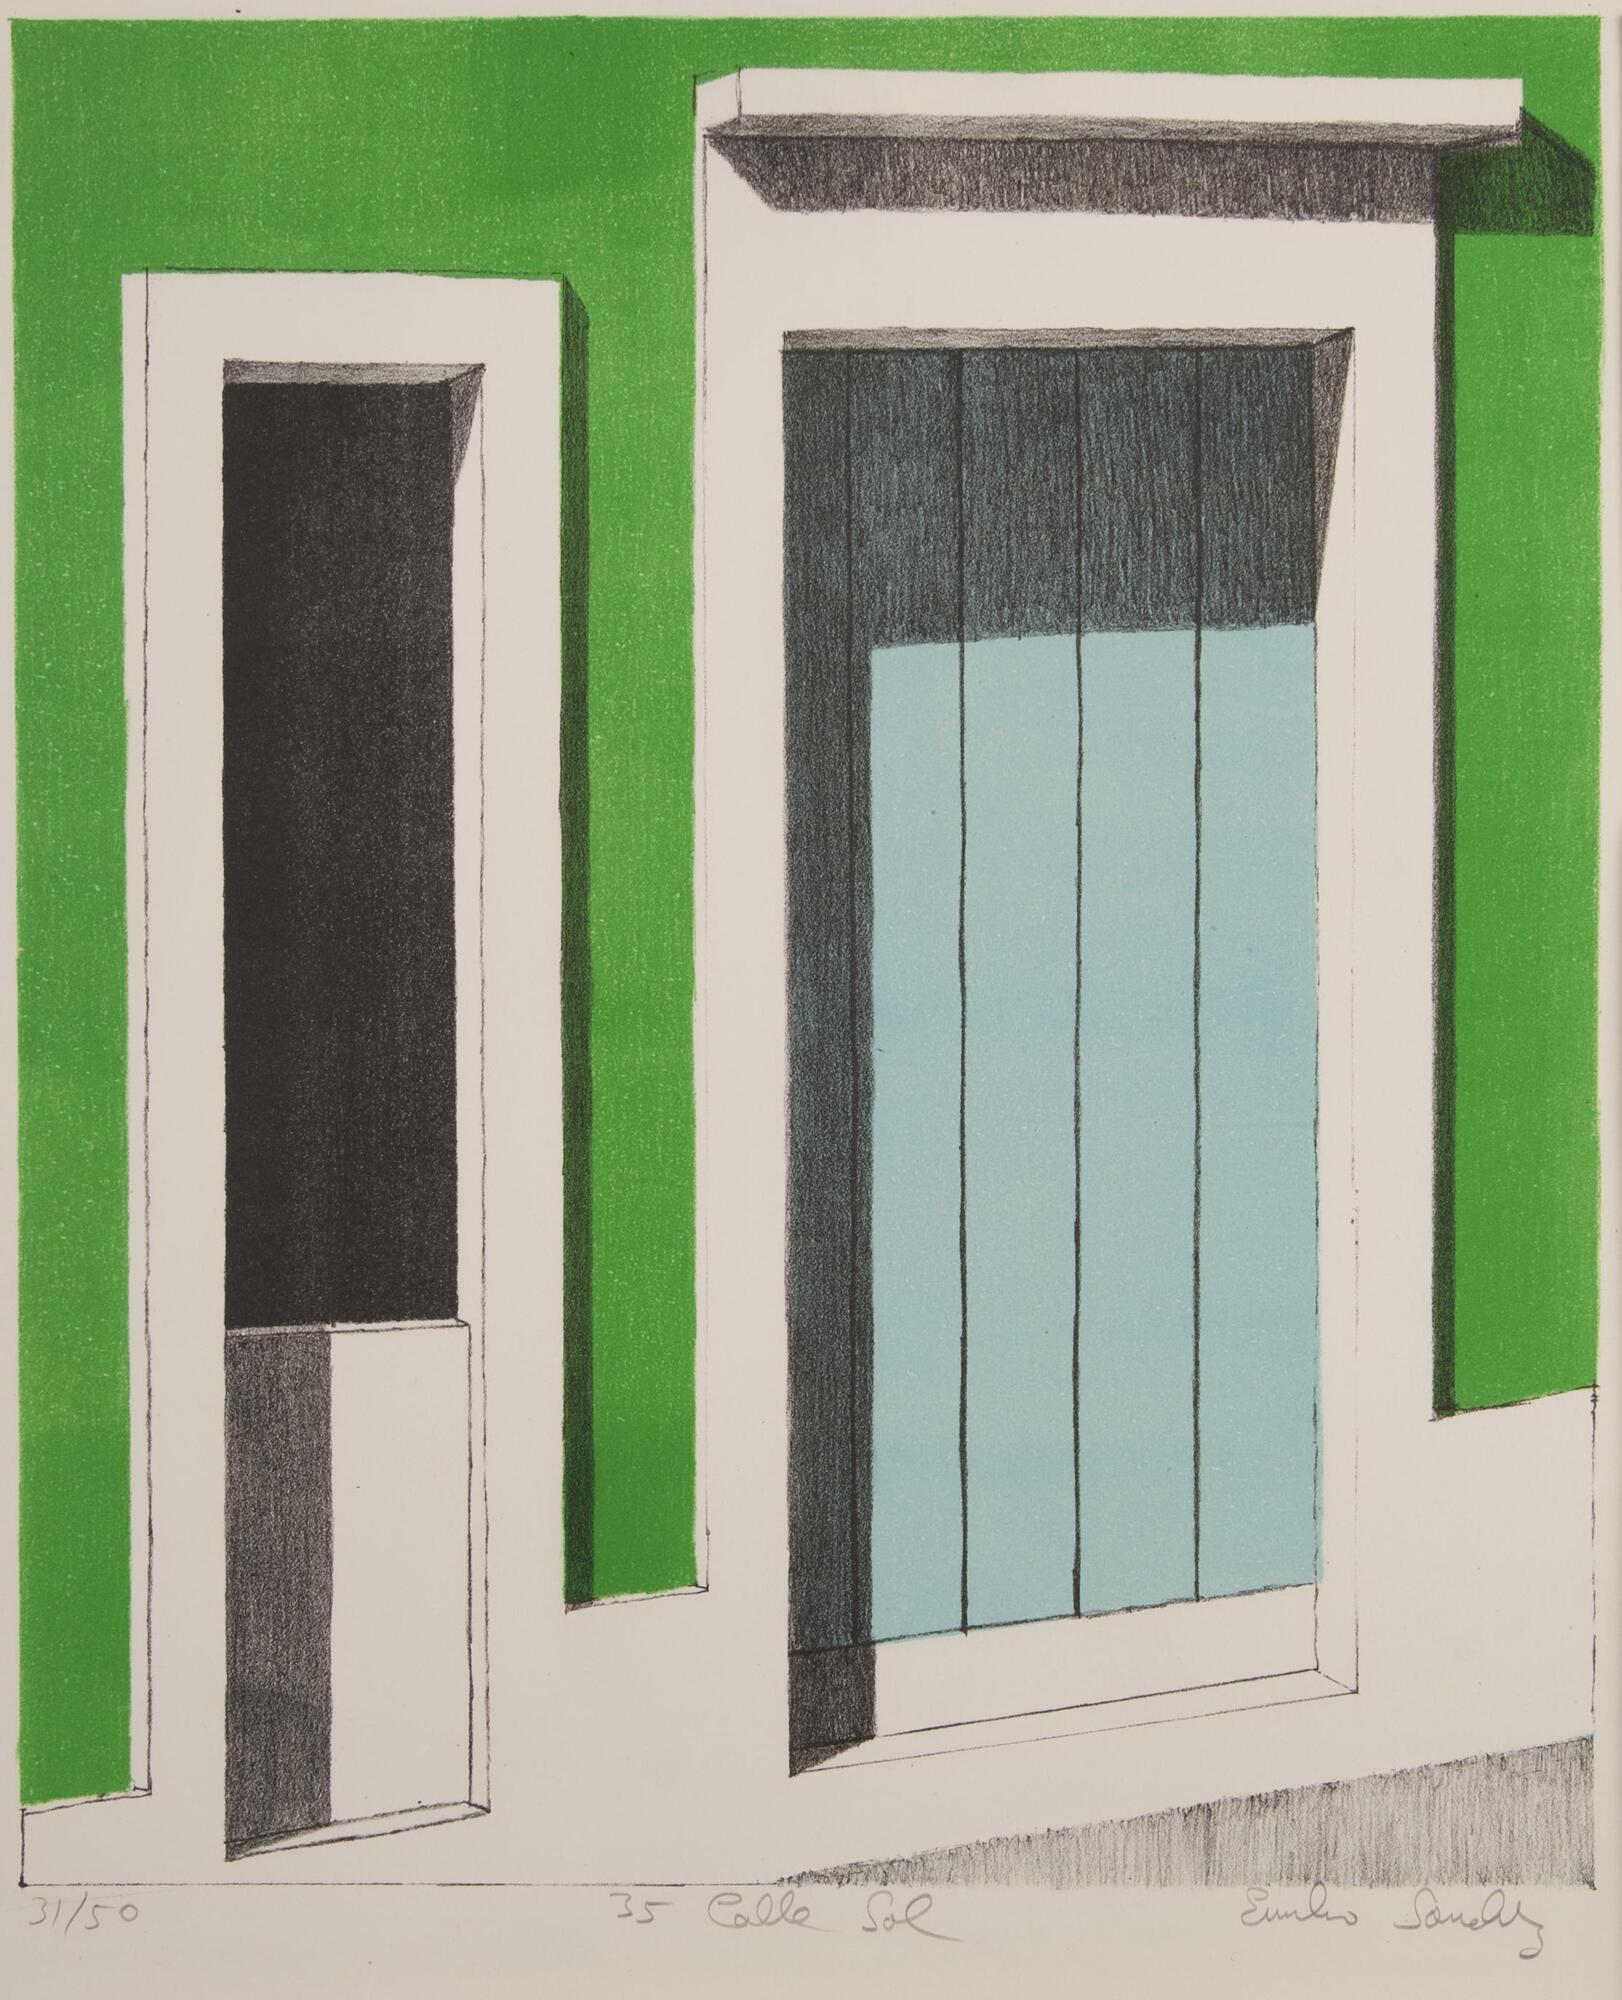 A color print of a blue door set into a bright green wall. An open doorway is next to it.